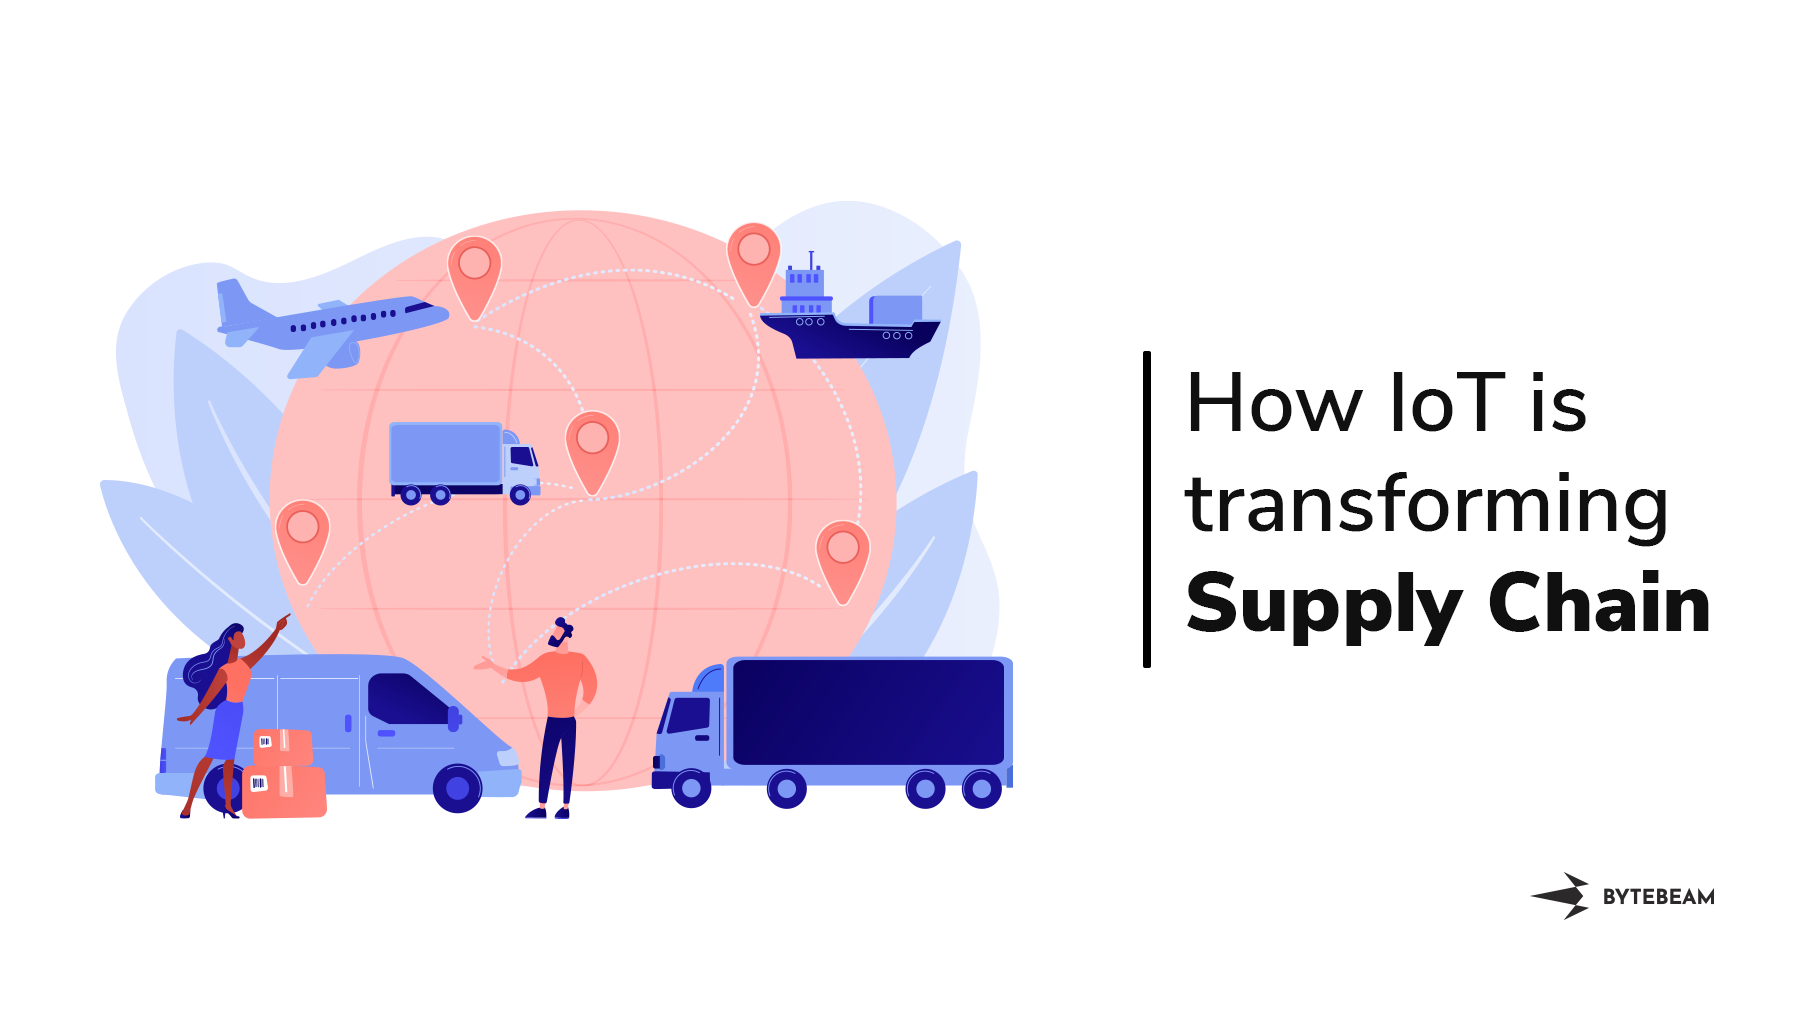 Illustration of IoT transforming Supply chain Industry